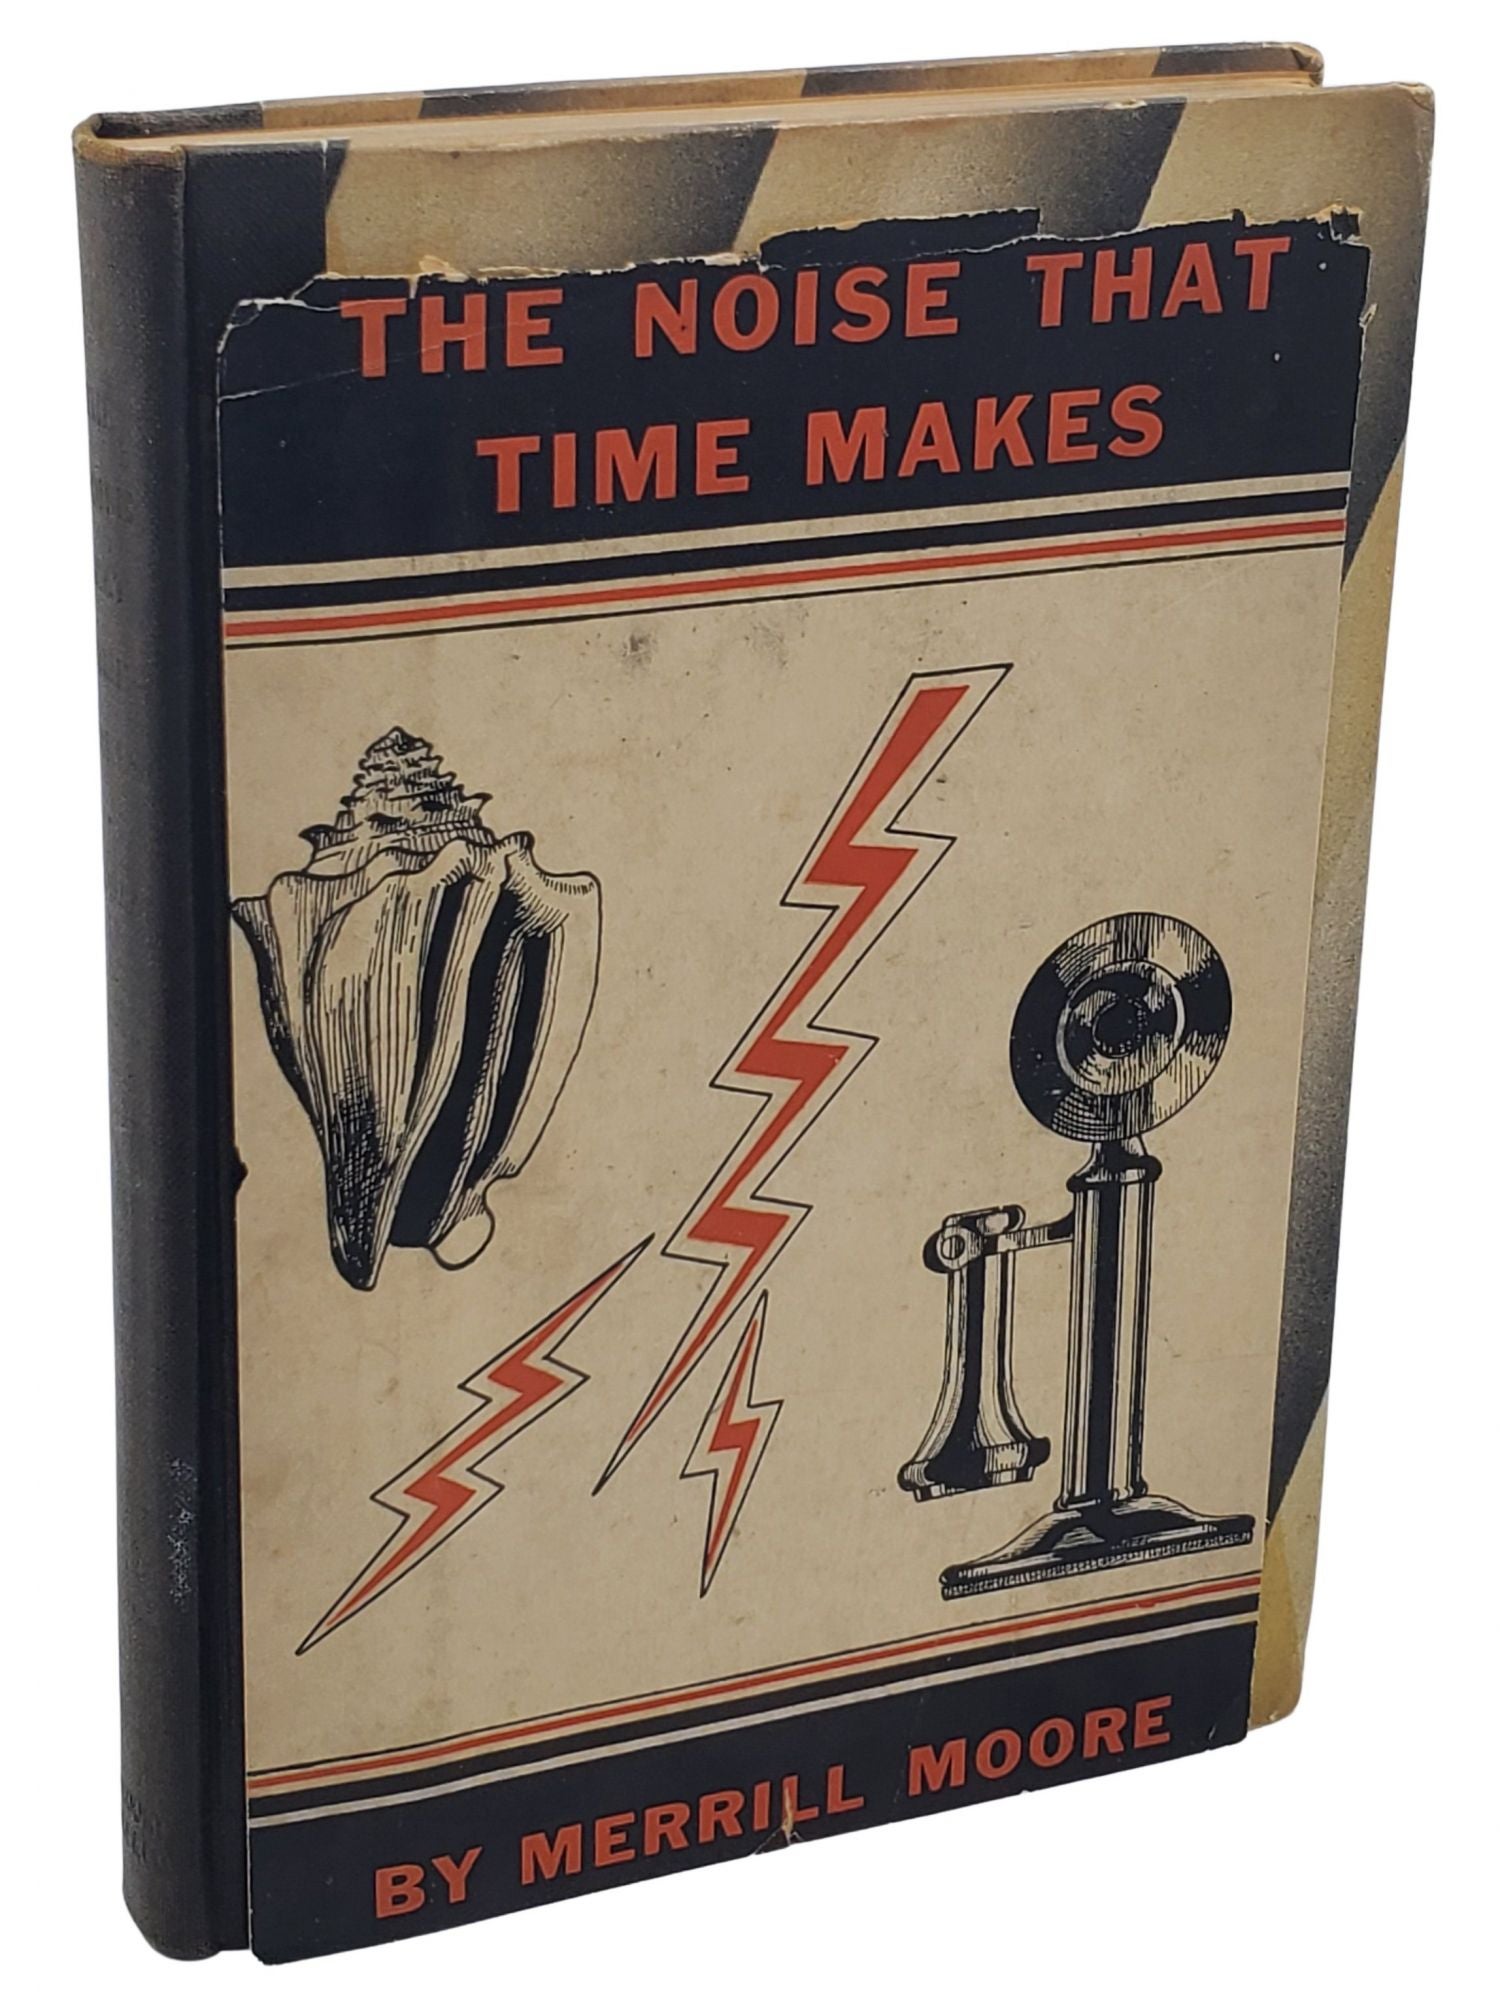 [Book #50485] THE NOISE THAT TIME MAKES. Merrill Moore.